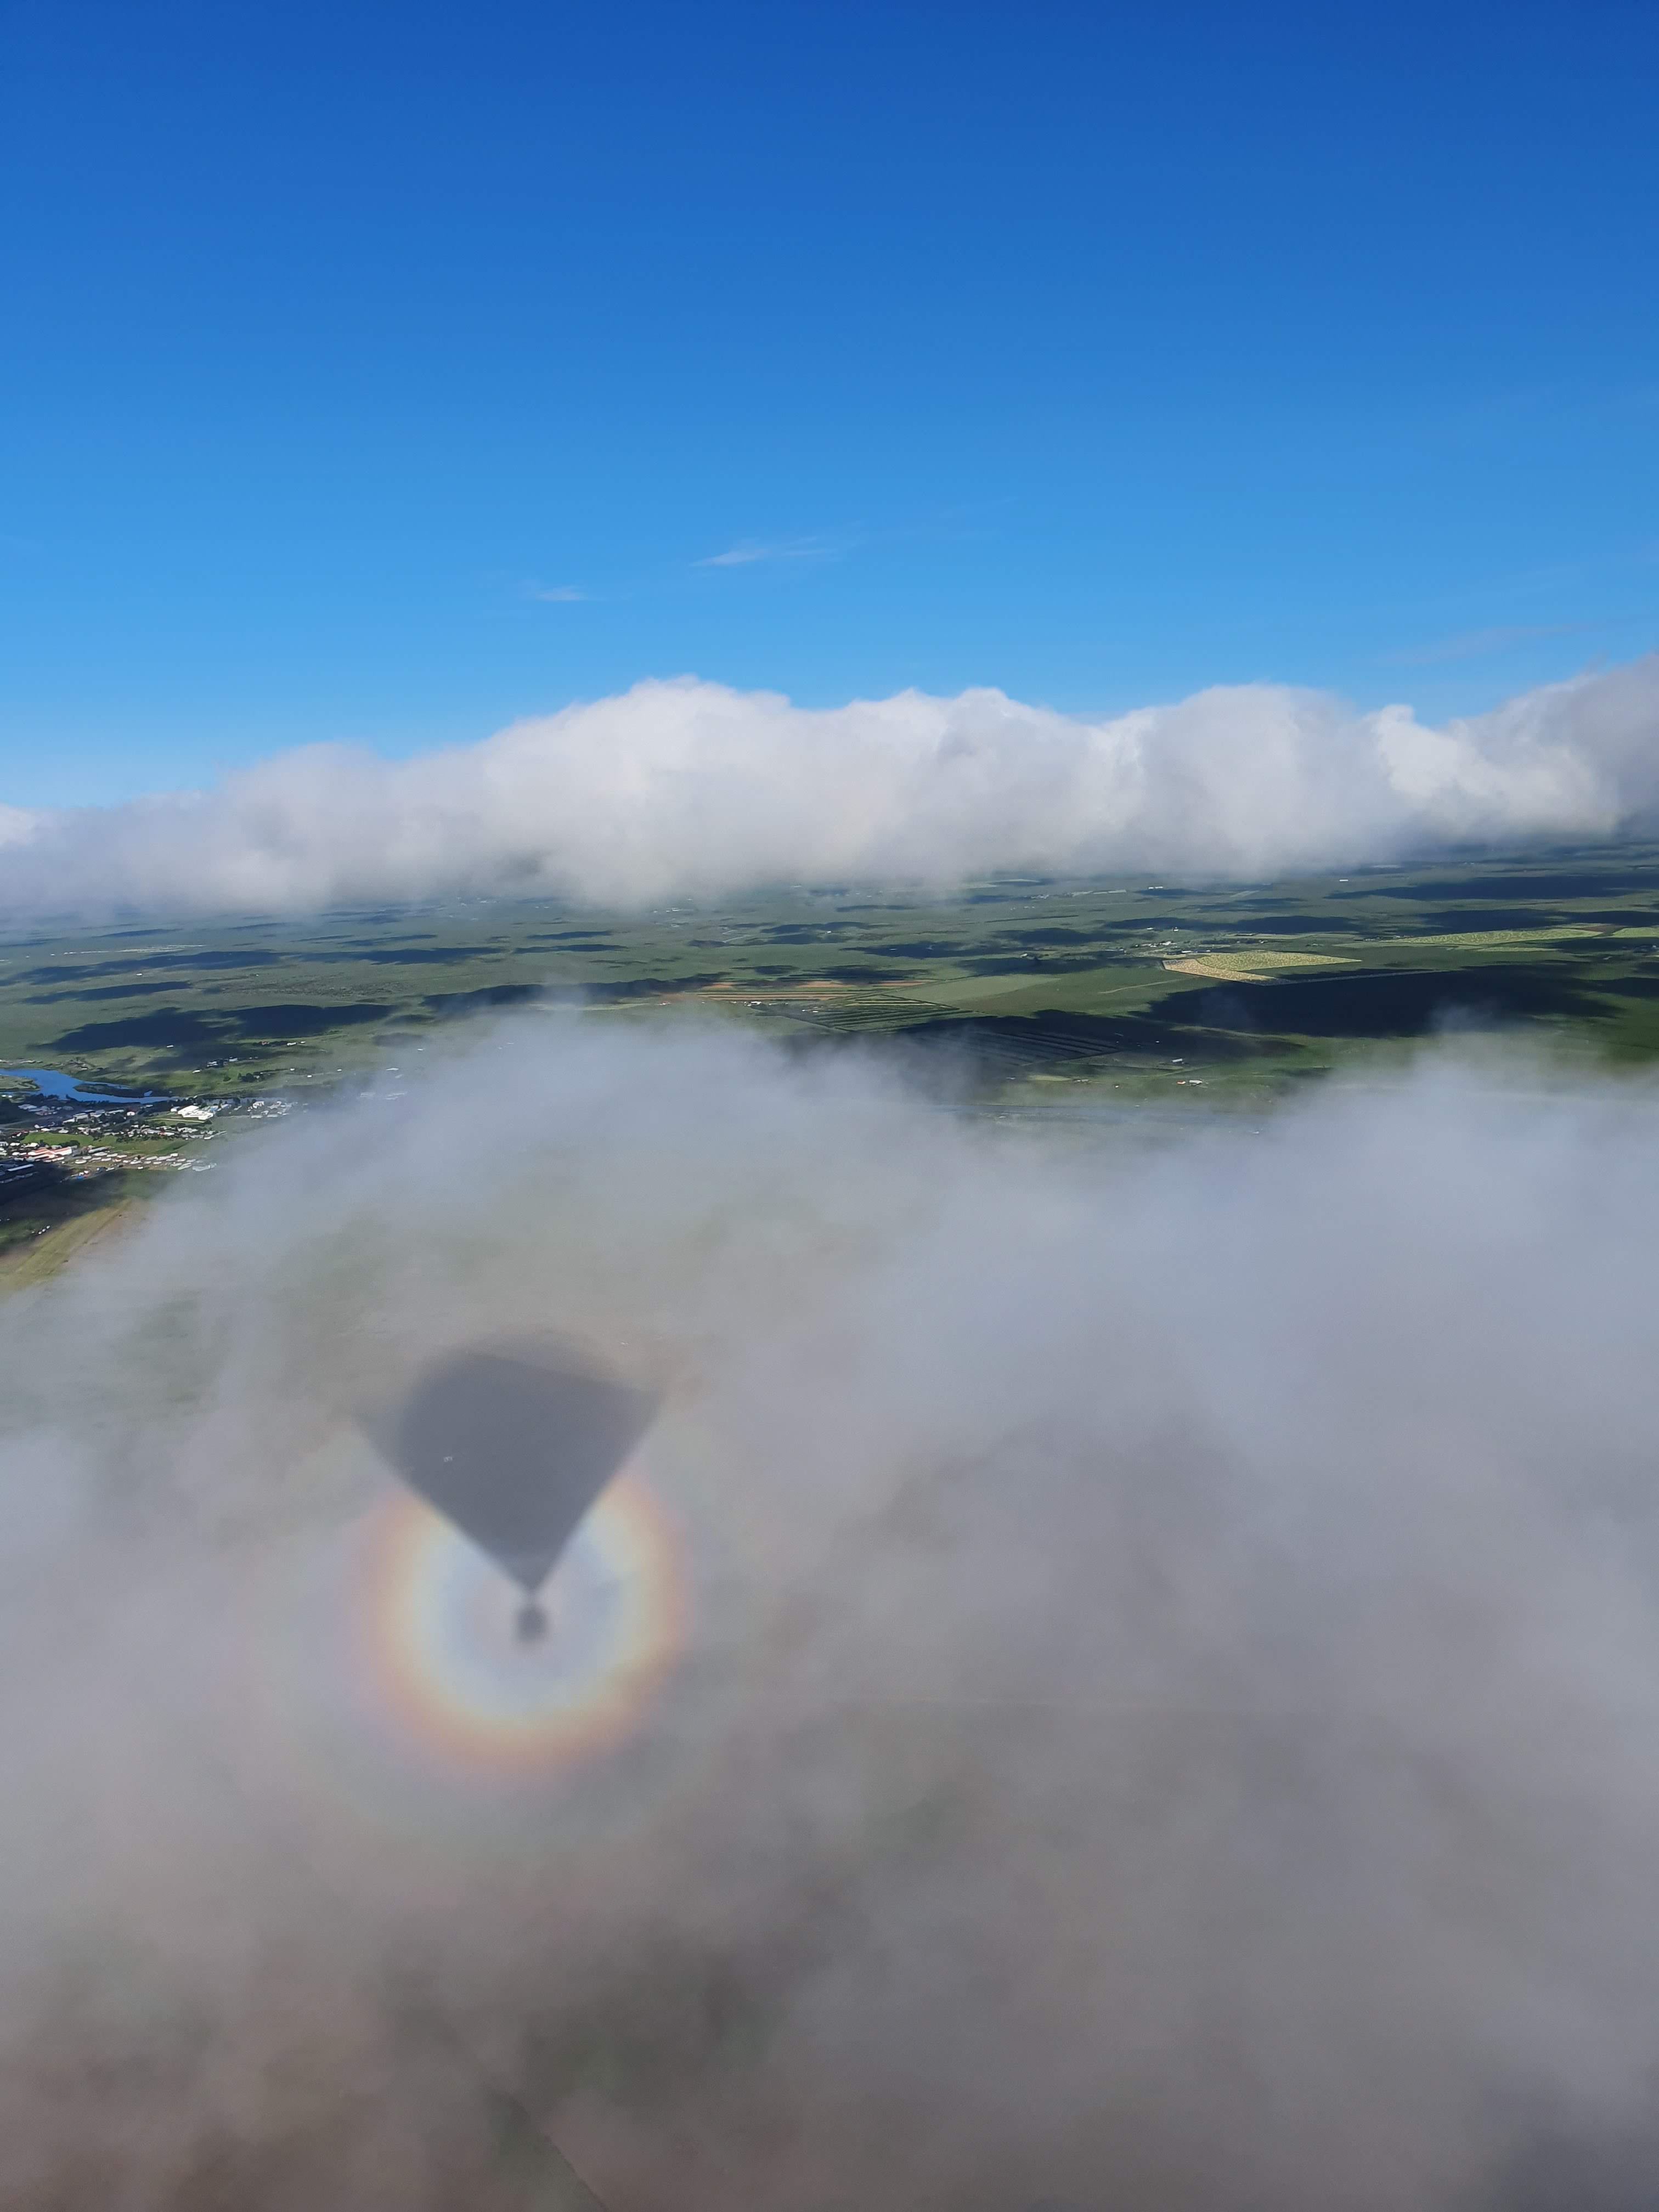 a view from within the hot air balloon looking out over the clouds and fertile land beneath